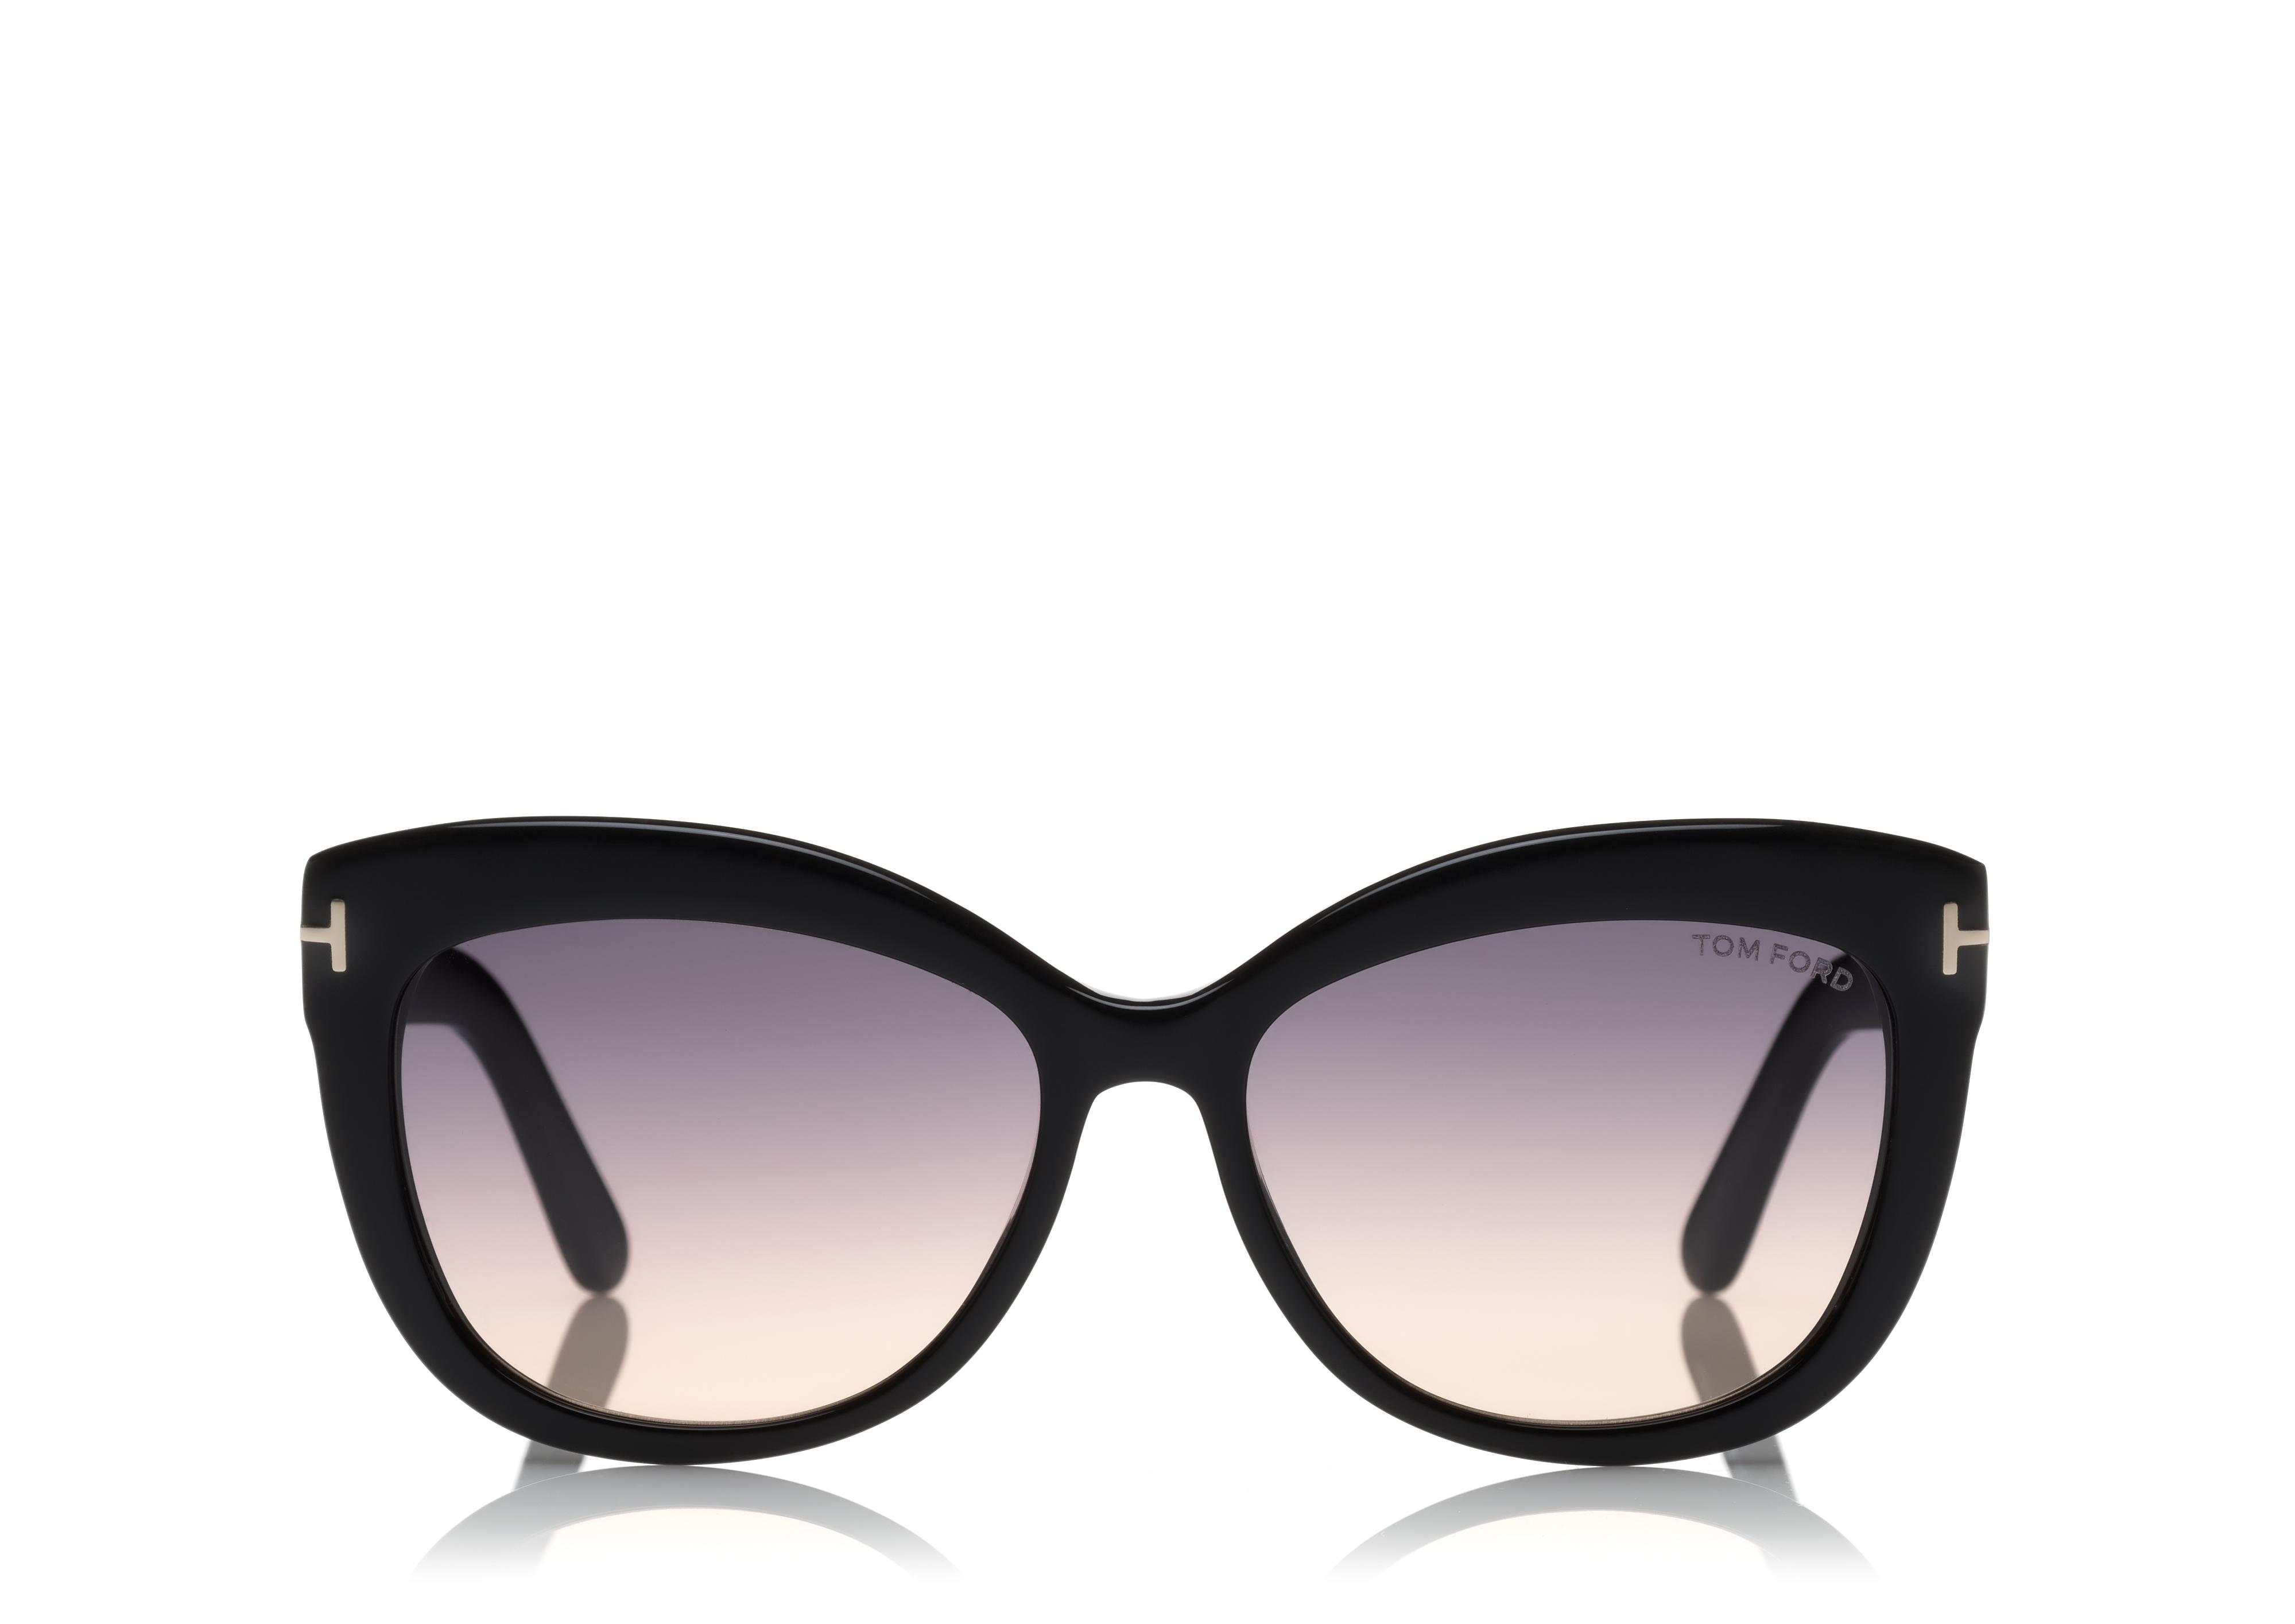 Tom Ford ALISTAIR SUNGLASSES 